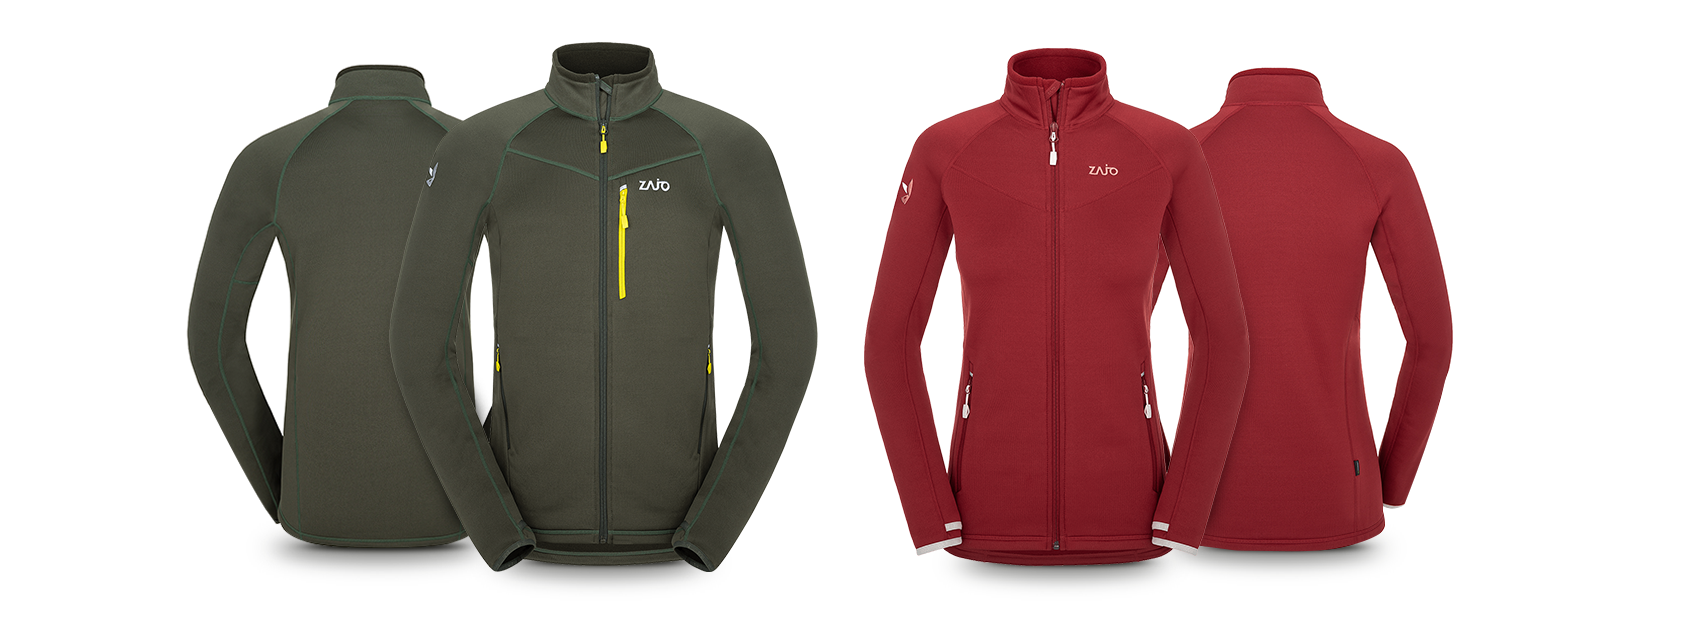 Arlberg and Anniviers fleece jackets with a new look!